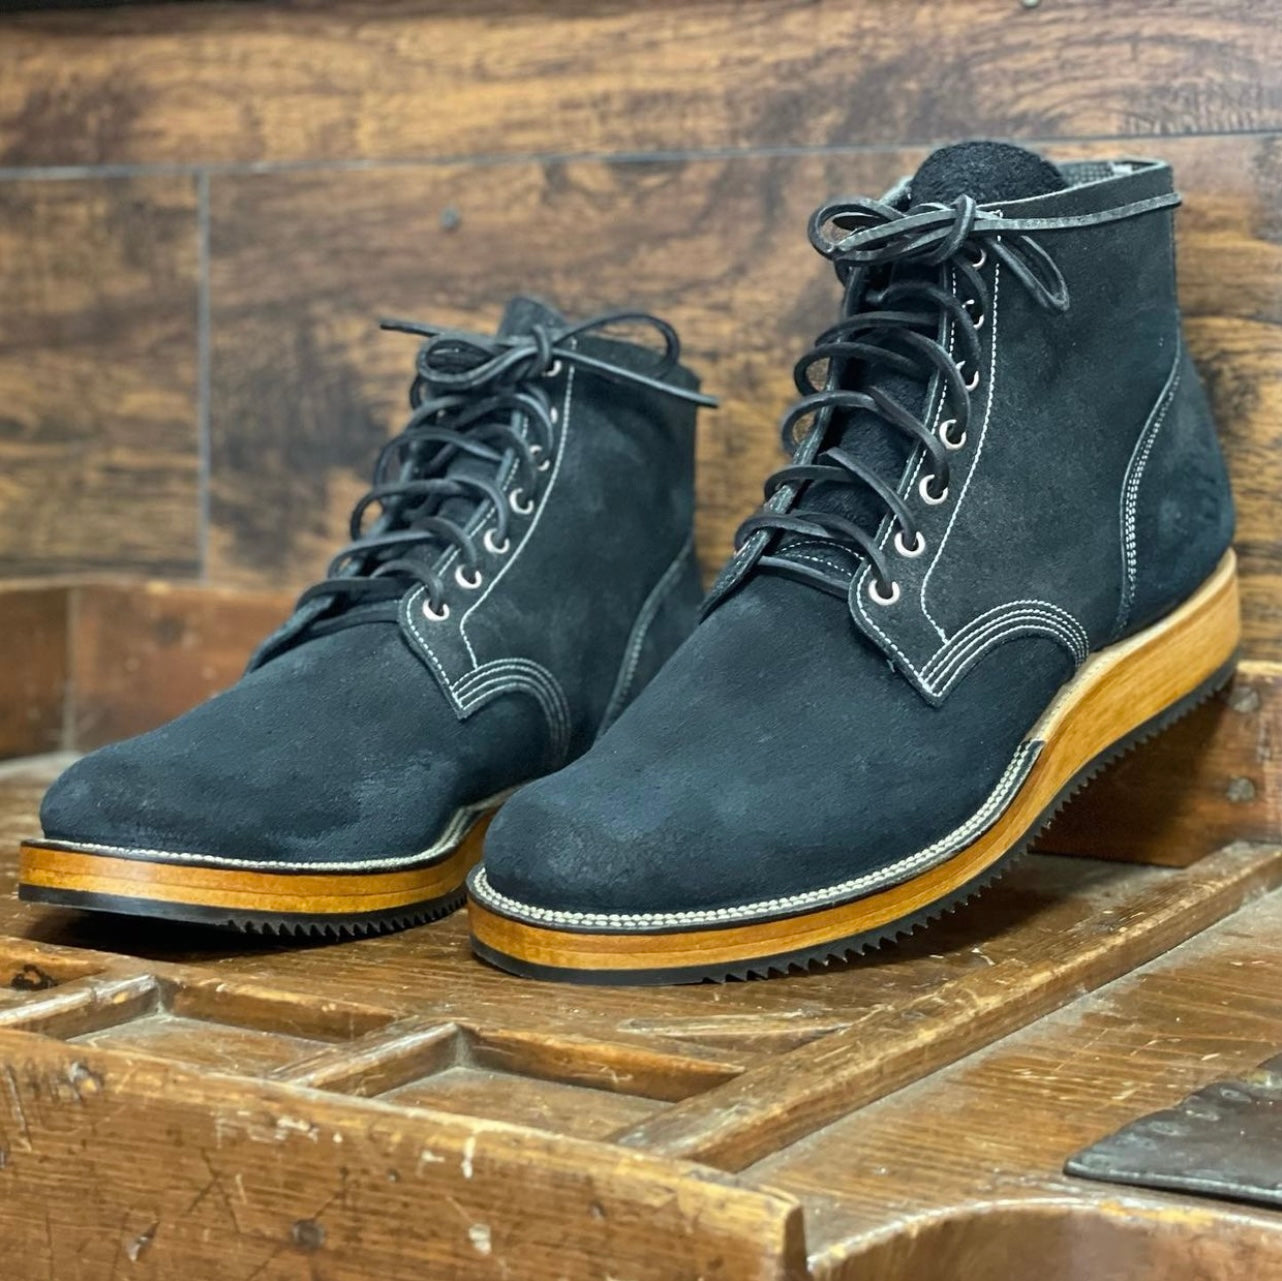 Viberg Boot with natural finish